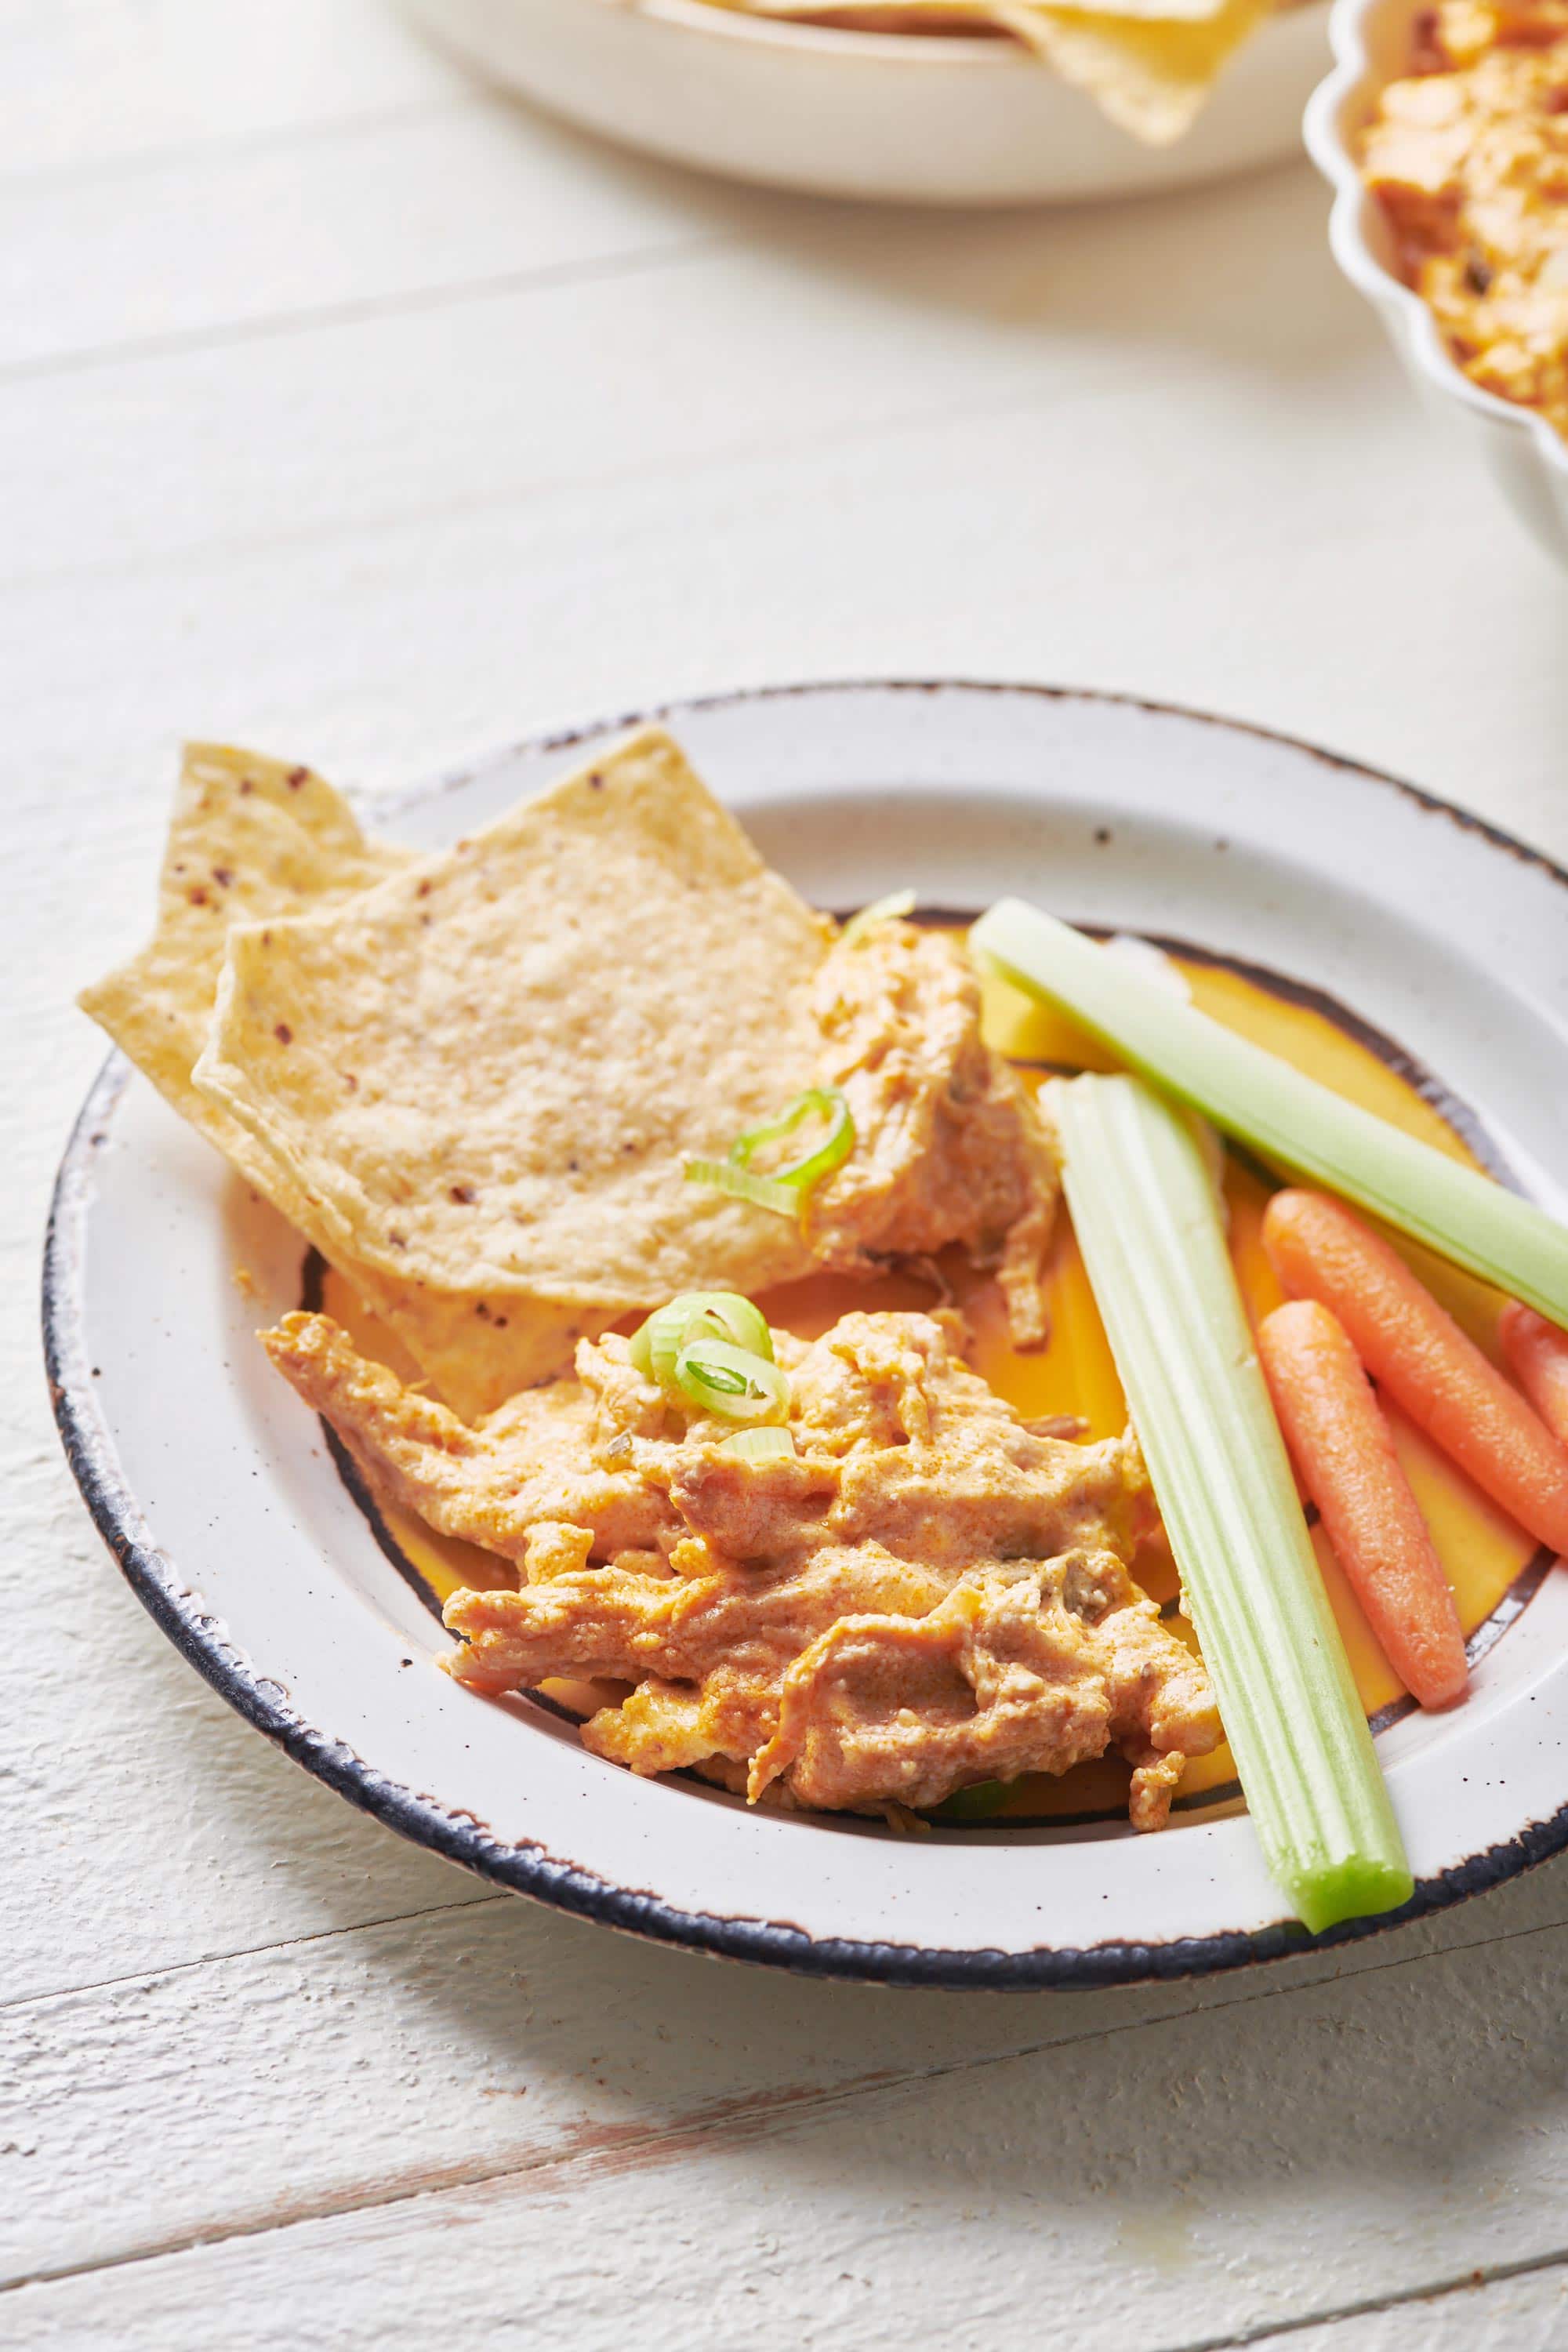 Buffalo Chicken Dip on a plate with chips and vegetables.